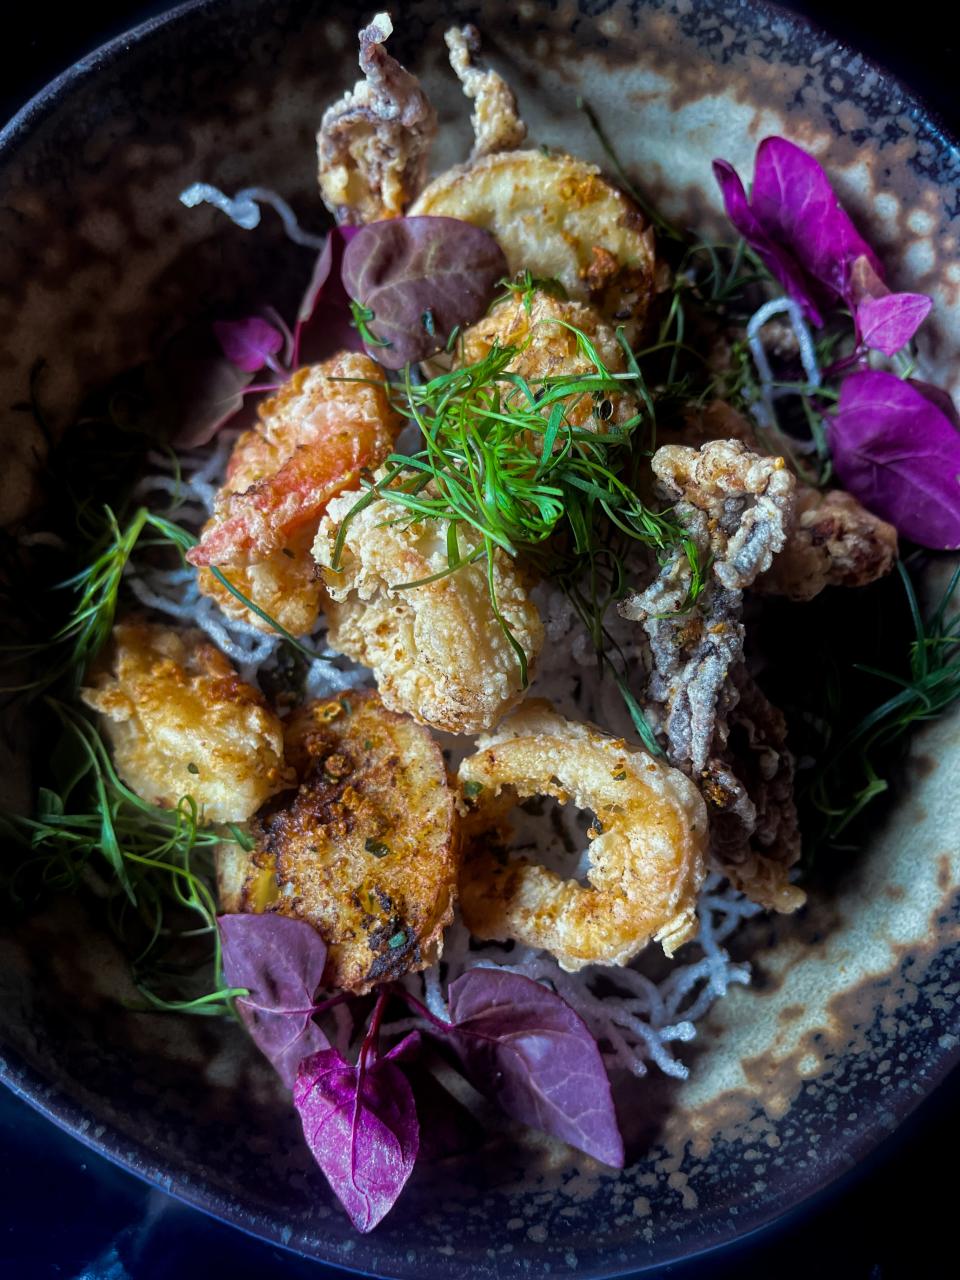 Muc chien gion, a crispy salt and pepper calamari with jalapeño, lemon and tamarind sauce, is just one of the delicious specials available on Mother's Day at Le Colonial in Delray Beach.